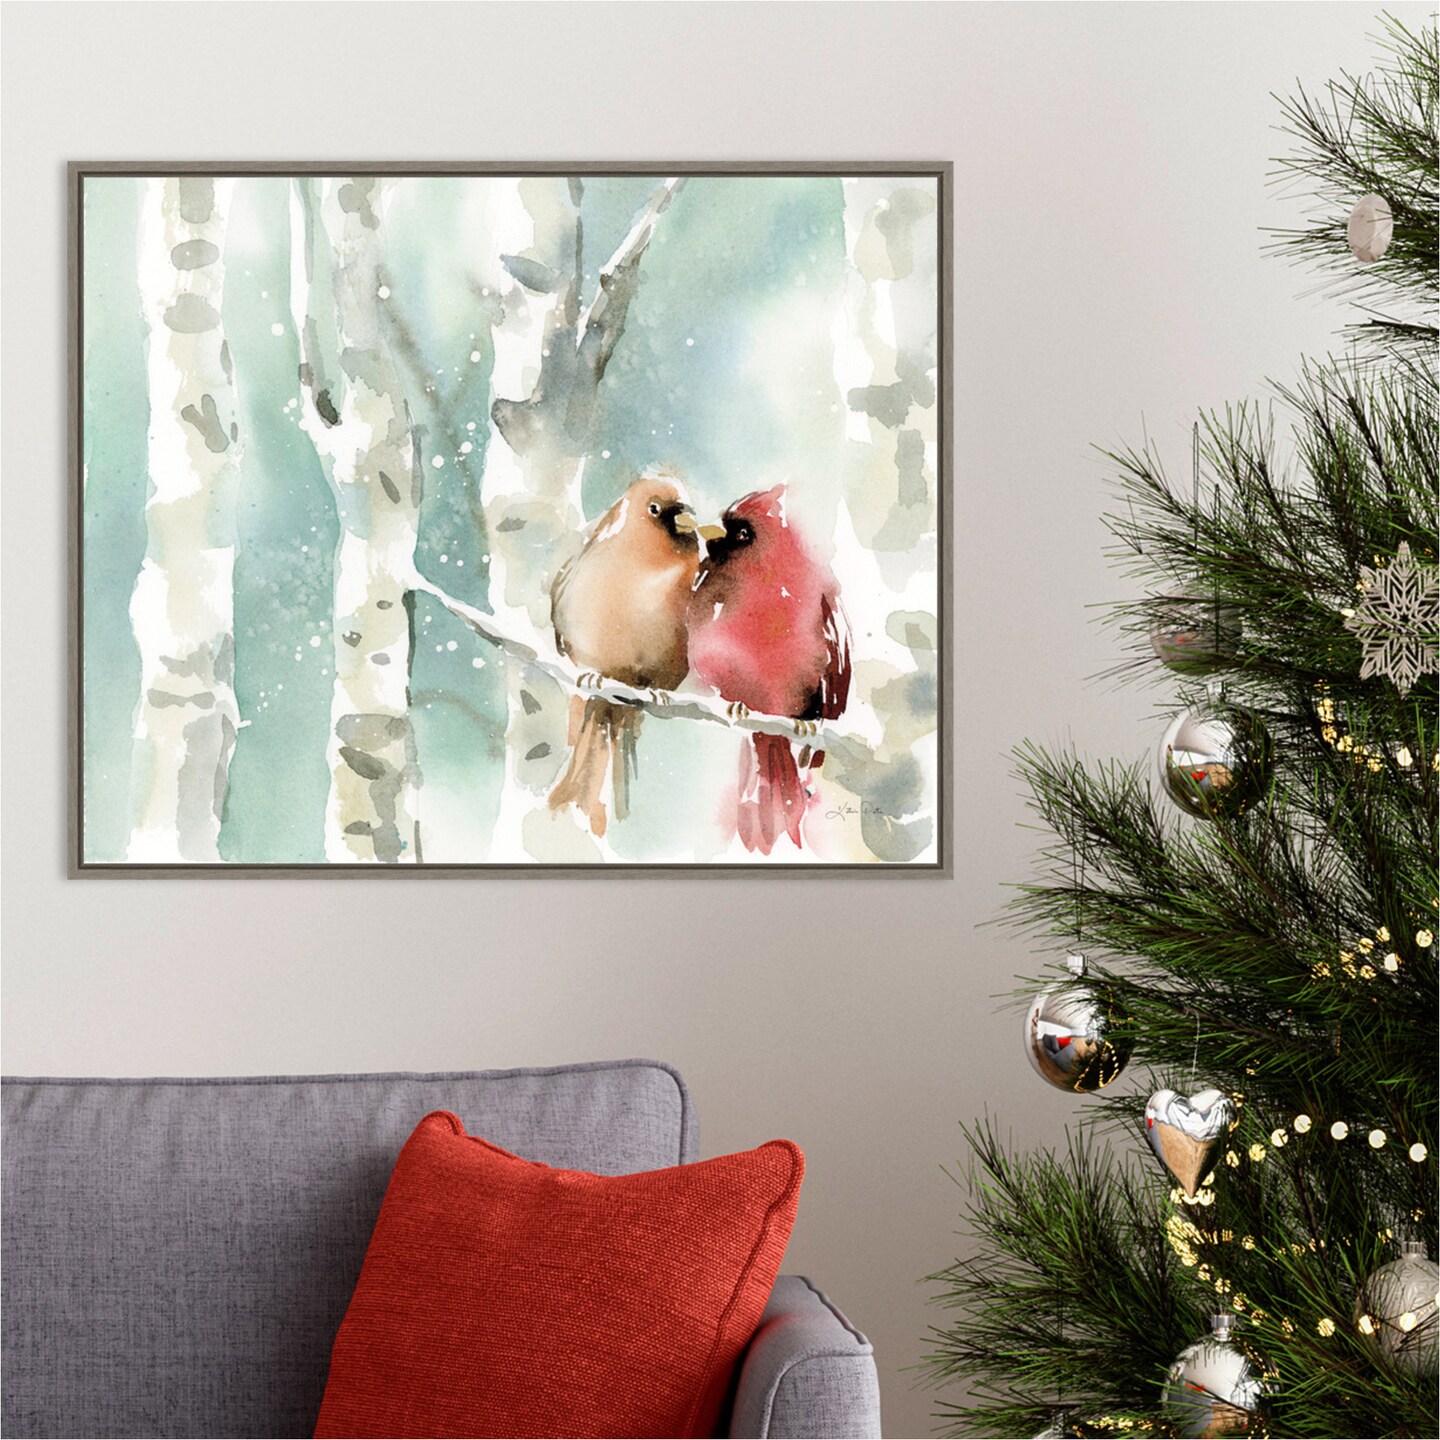 Christmas Cardinals by Katrina Pete 28-in. W x 23-in. H. Canvas Wall Art Print Framed in Grey